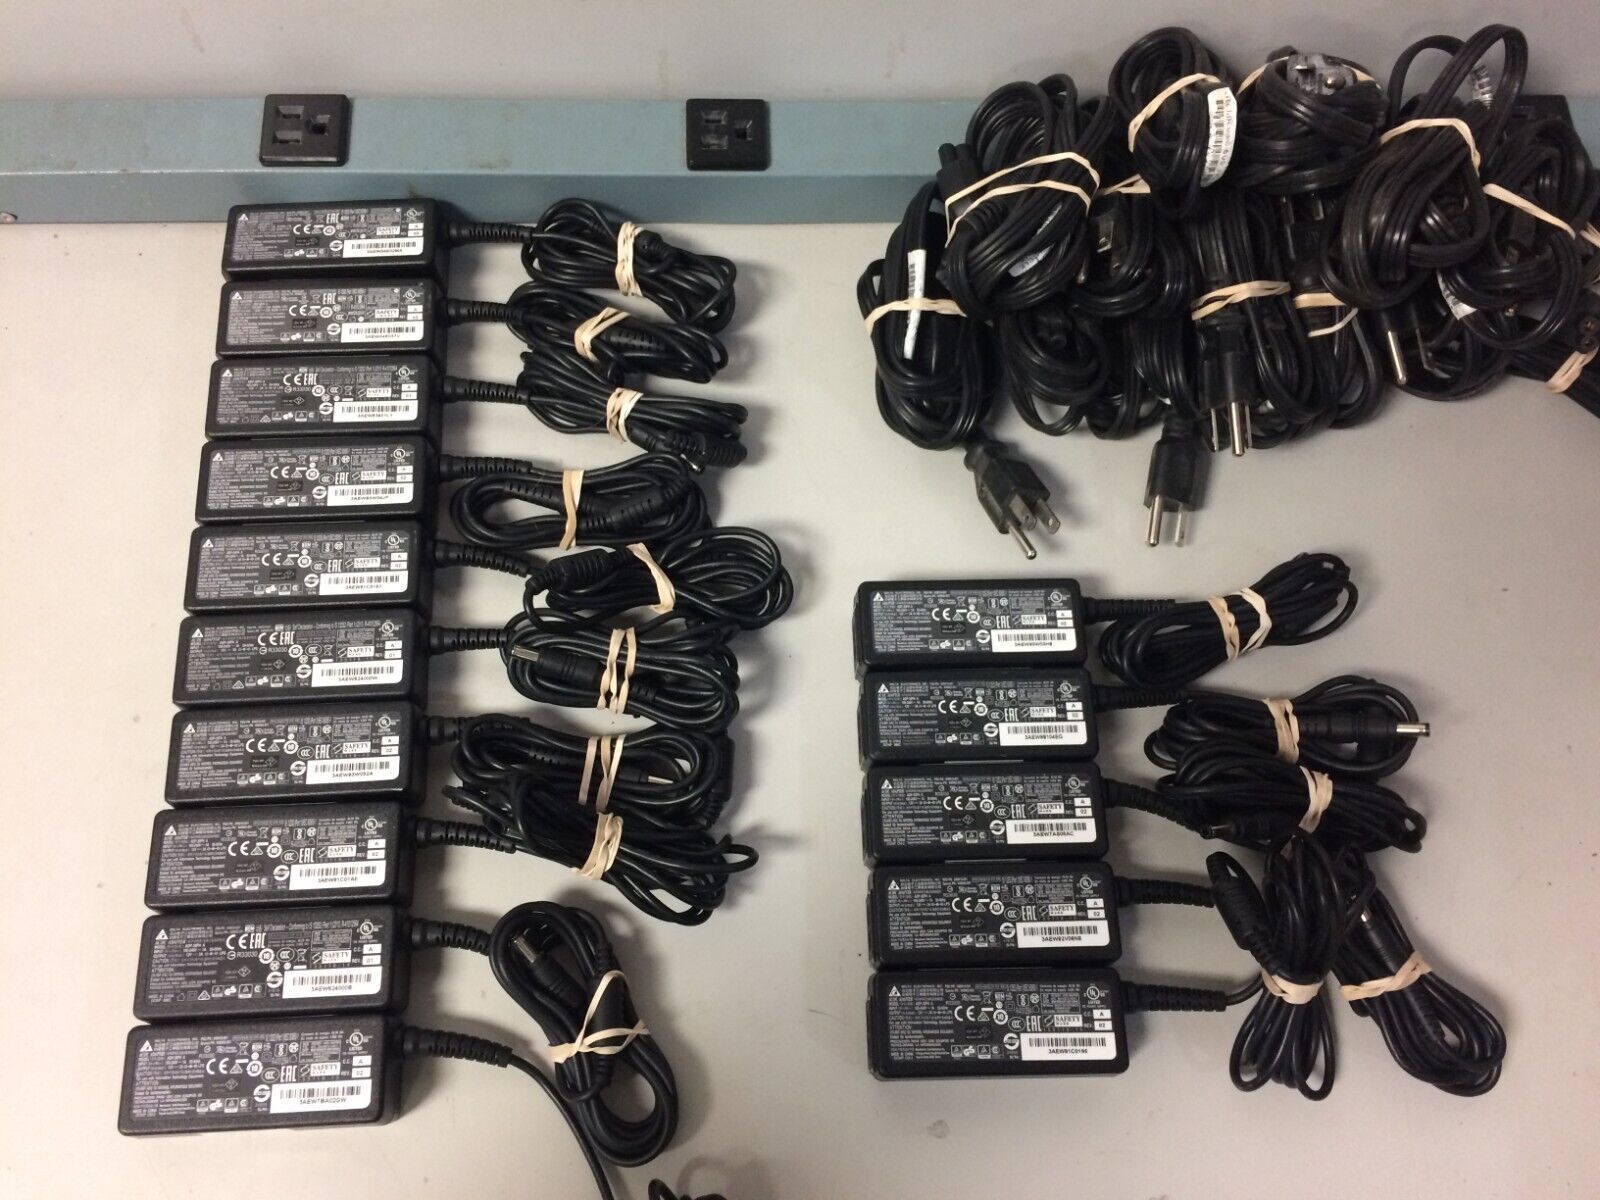 LOT of 15 Delta Electronics 12V 3A 35W AC Power Adapters ADP-36PH